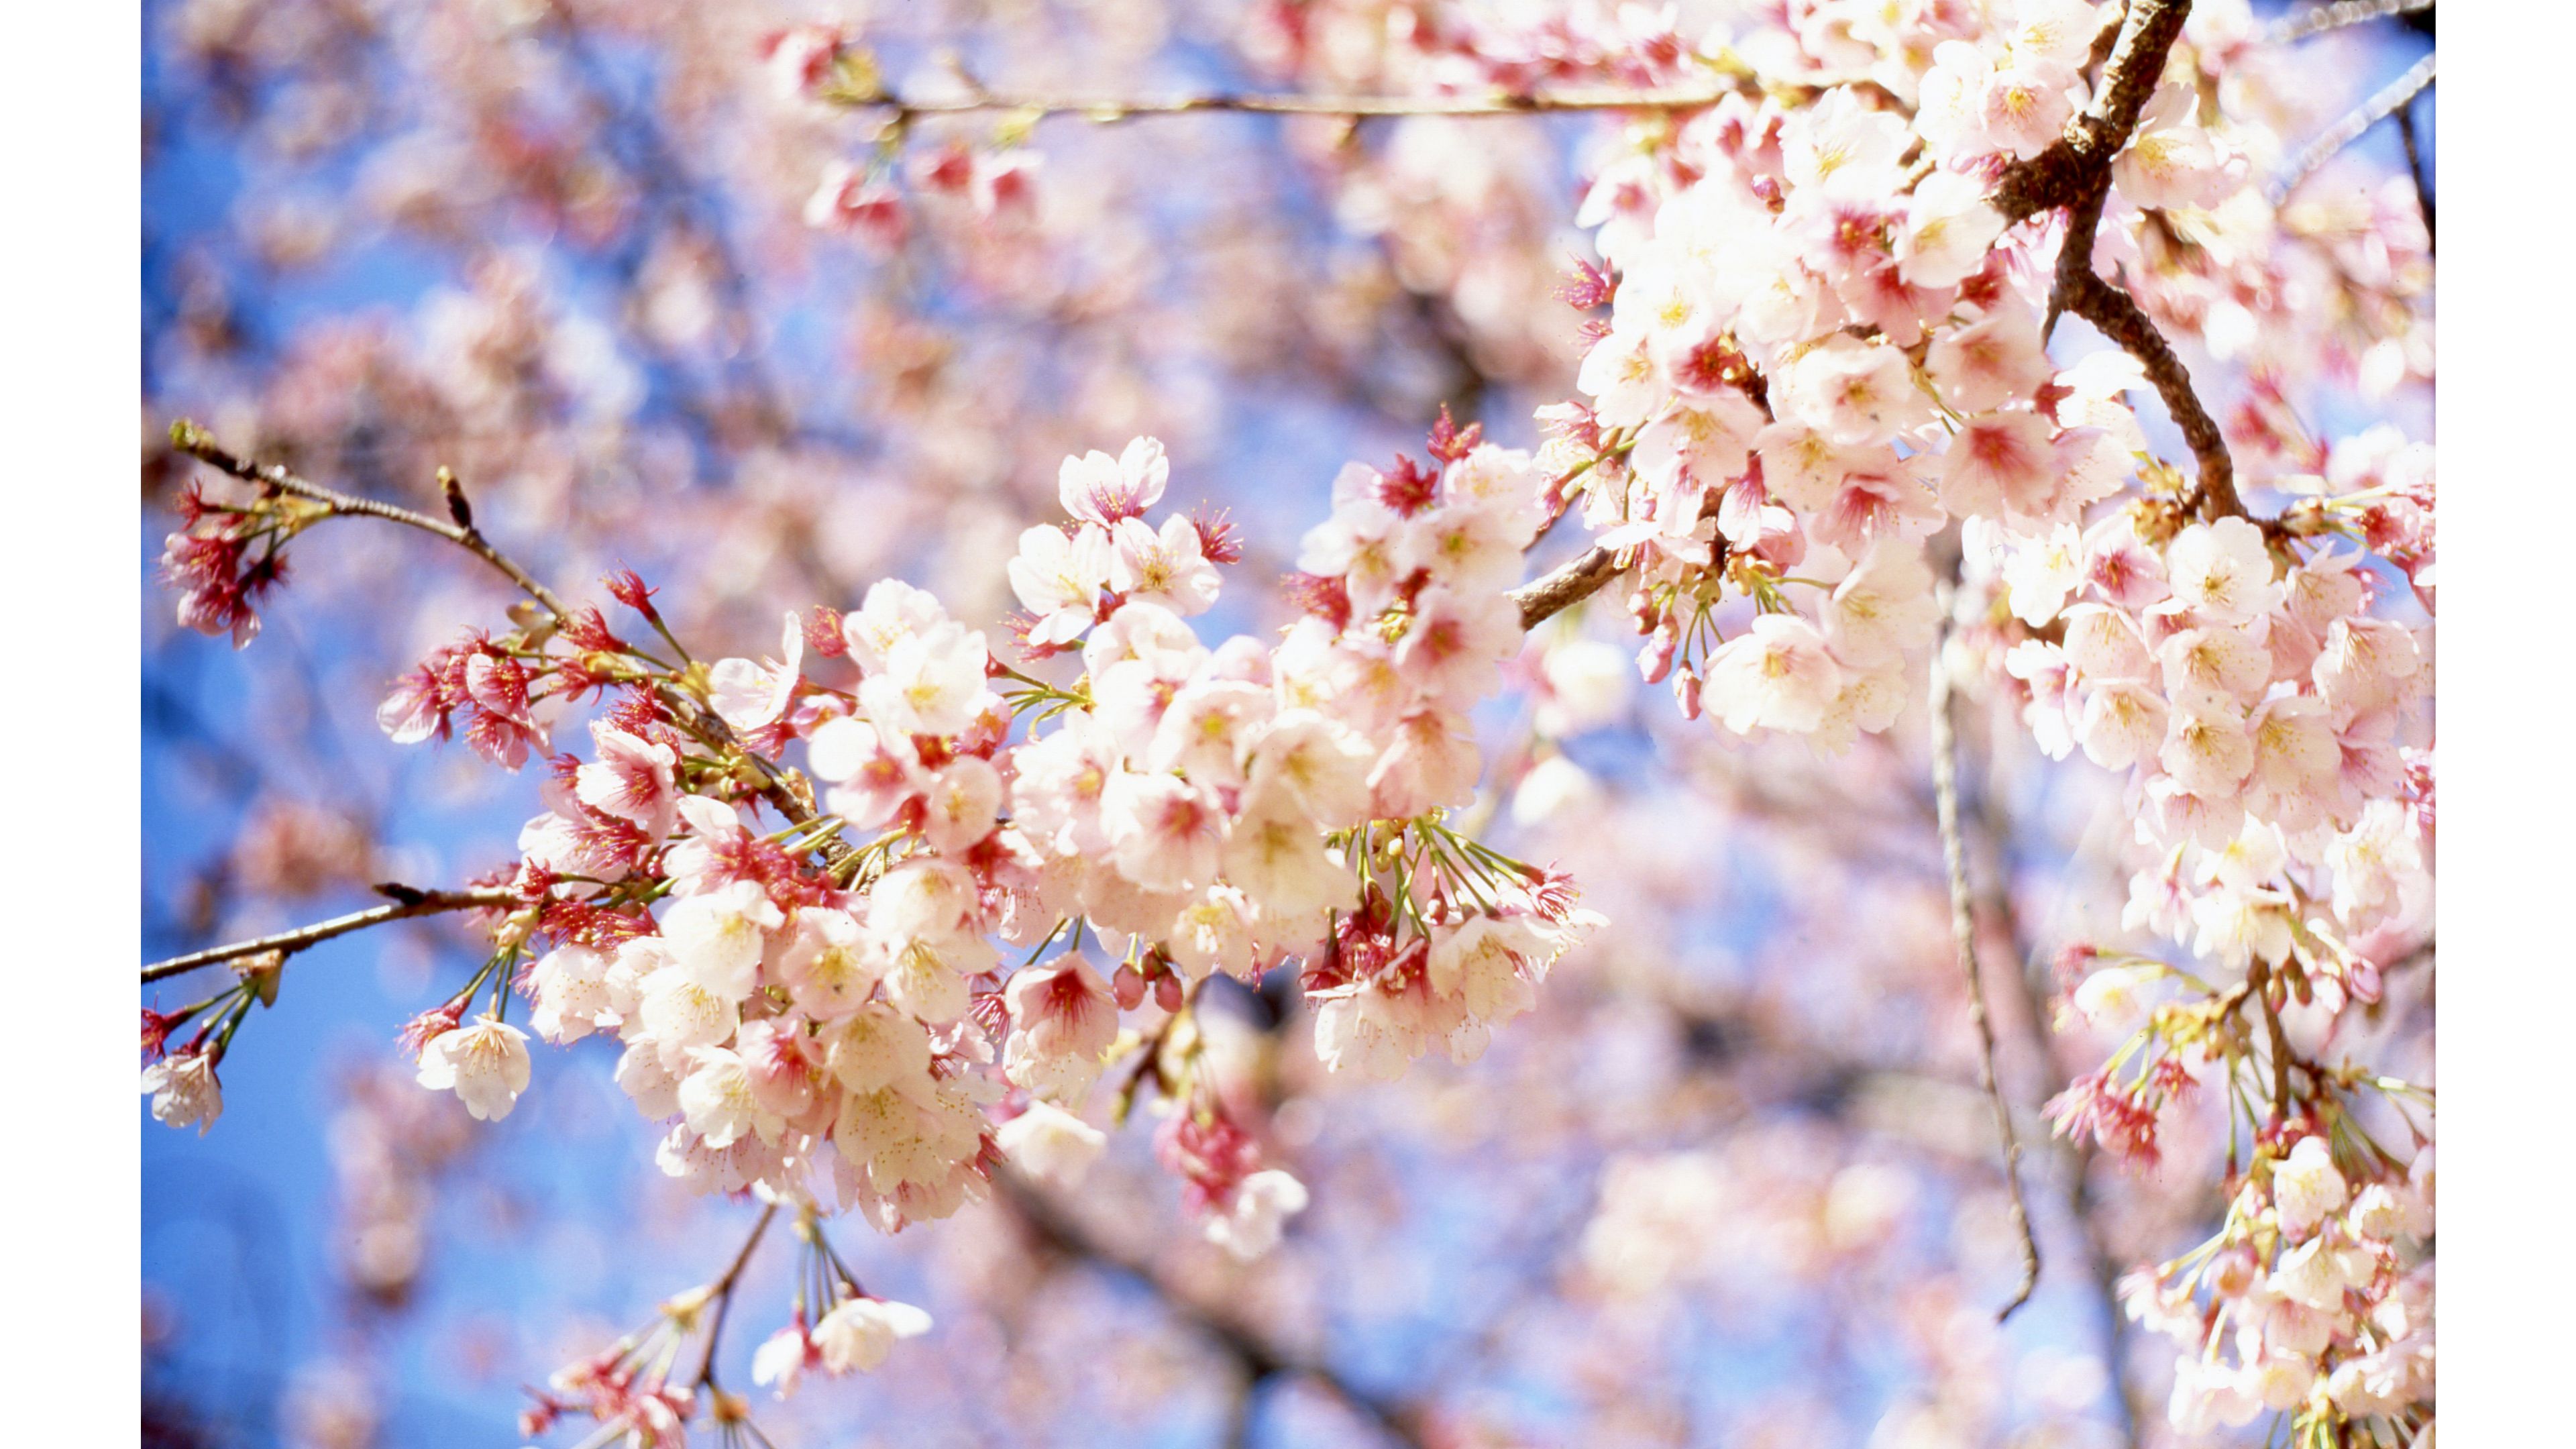 15 Top spring desktop wallpaper cute You Can Save It For Free ...